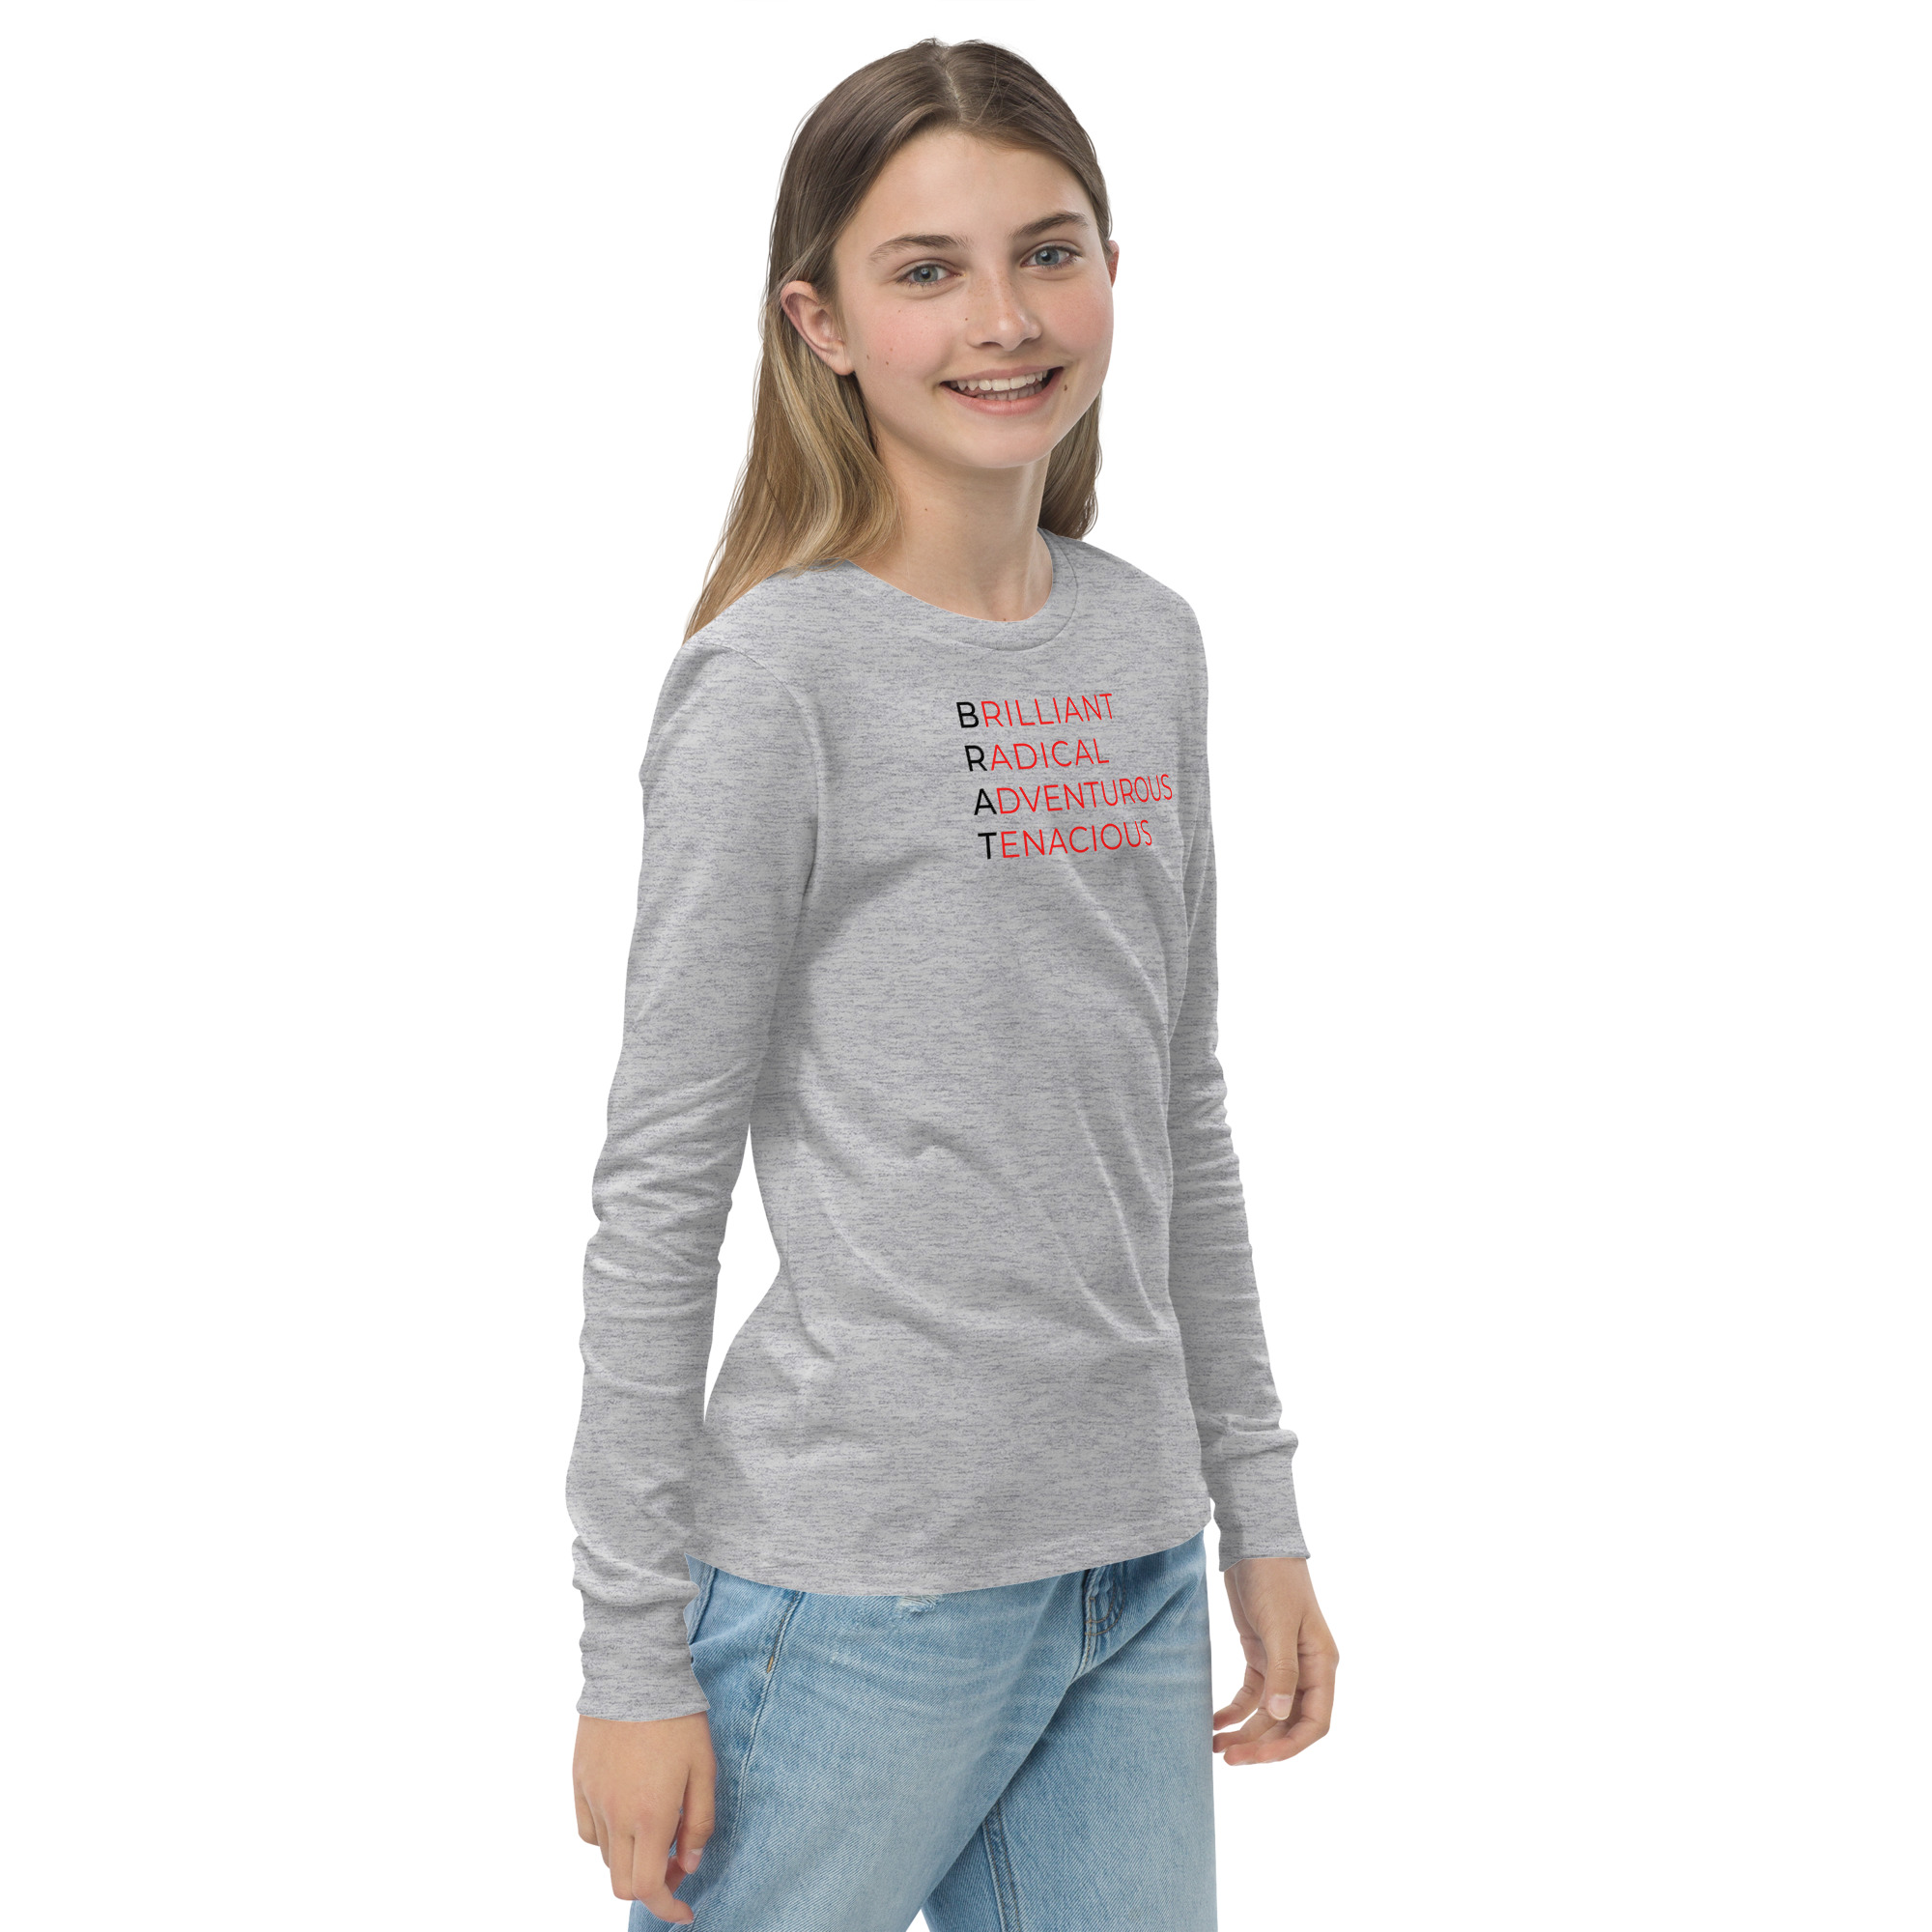 youth-long-sleeve-tee-athletic-heather-right-front-6384c46157a80.jpg